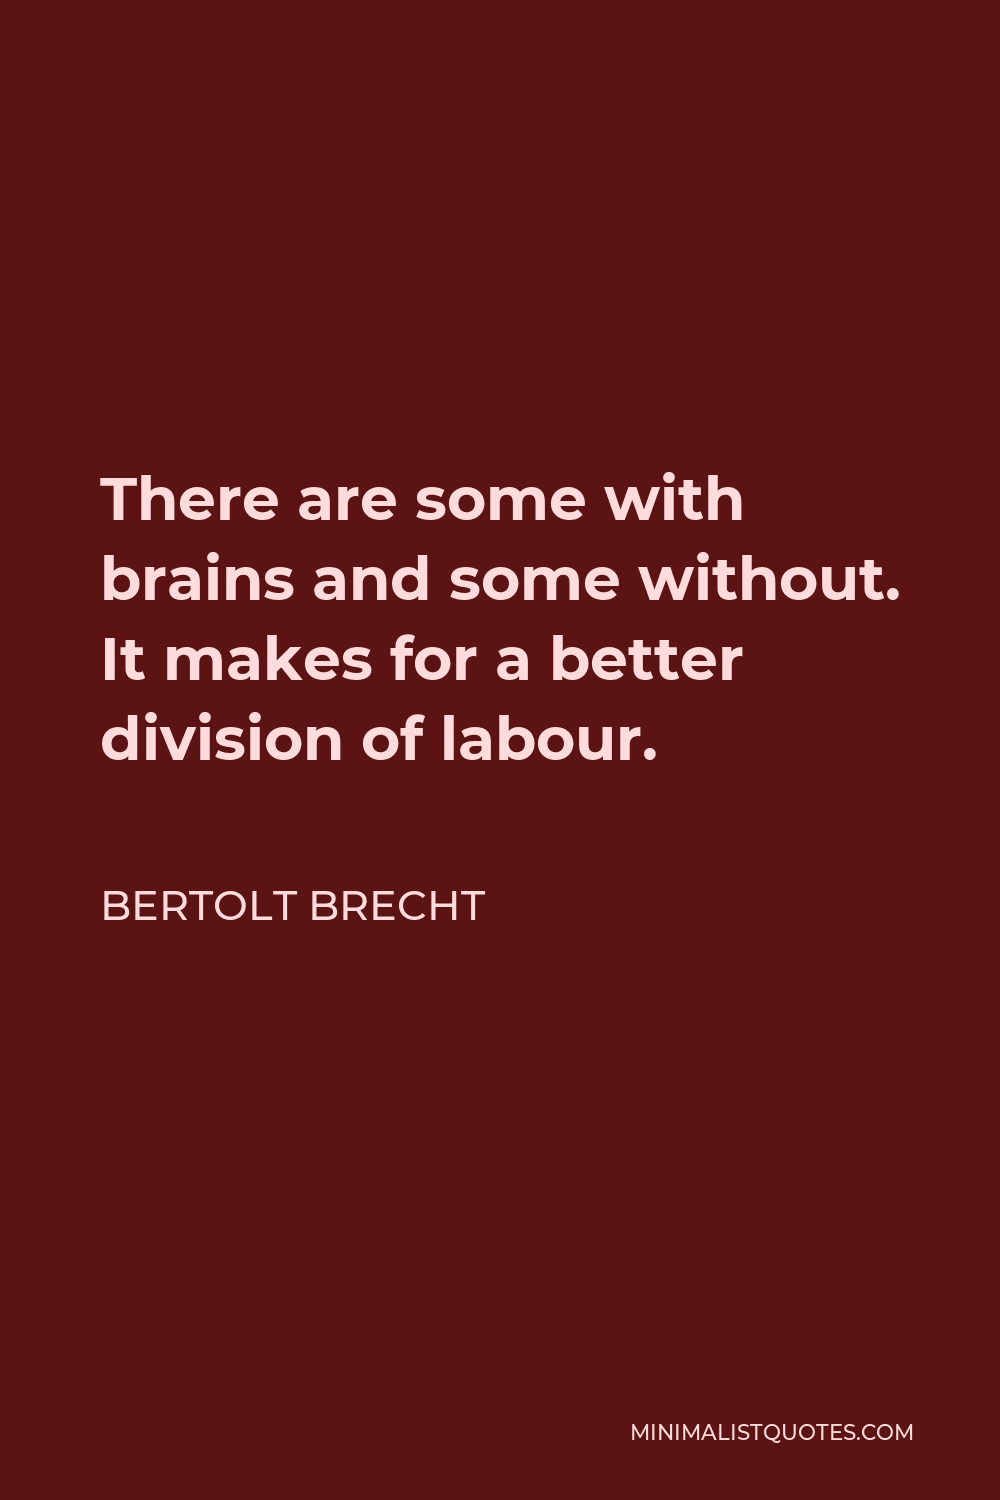 Bertolt Brecht Quote - There are some with brains and some without. It makes for a better division of labour.